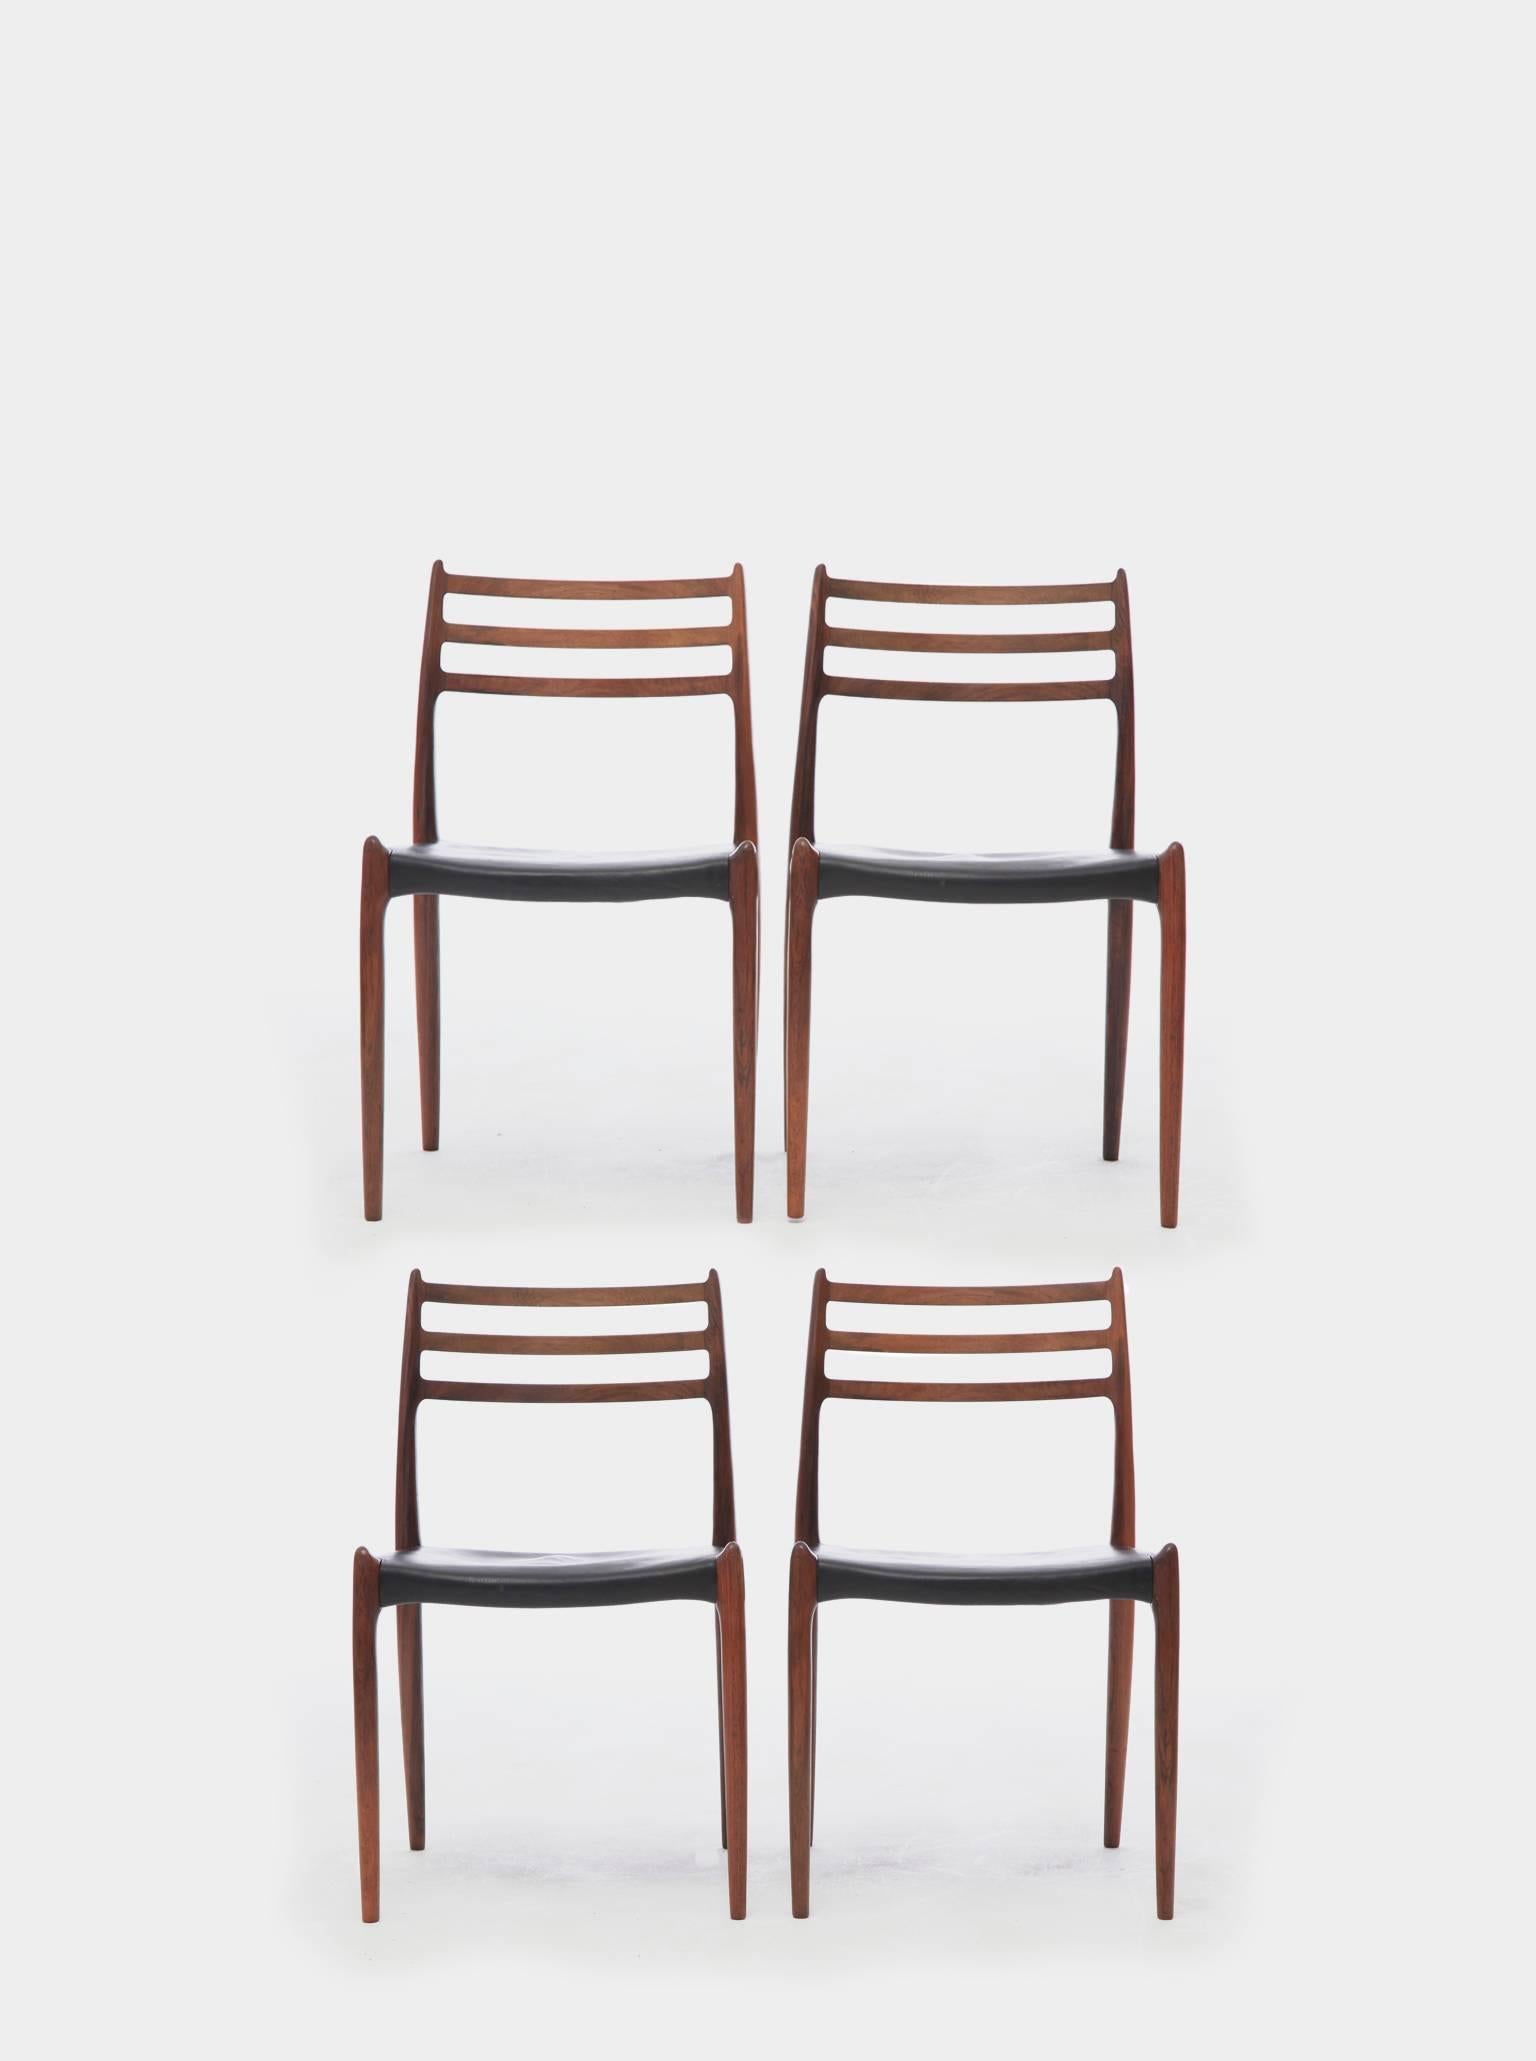 A set of four rosewood N.O. Møller 78 side chairs, 1962 for J.L. Møllers Møbelfabrik, Denmark. Rosewood, leather seat covers.

  